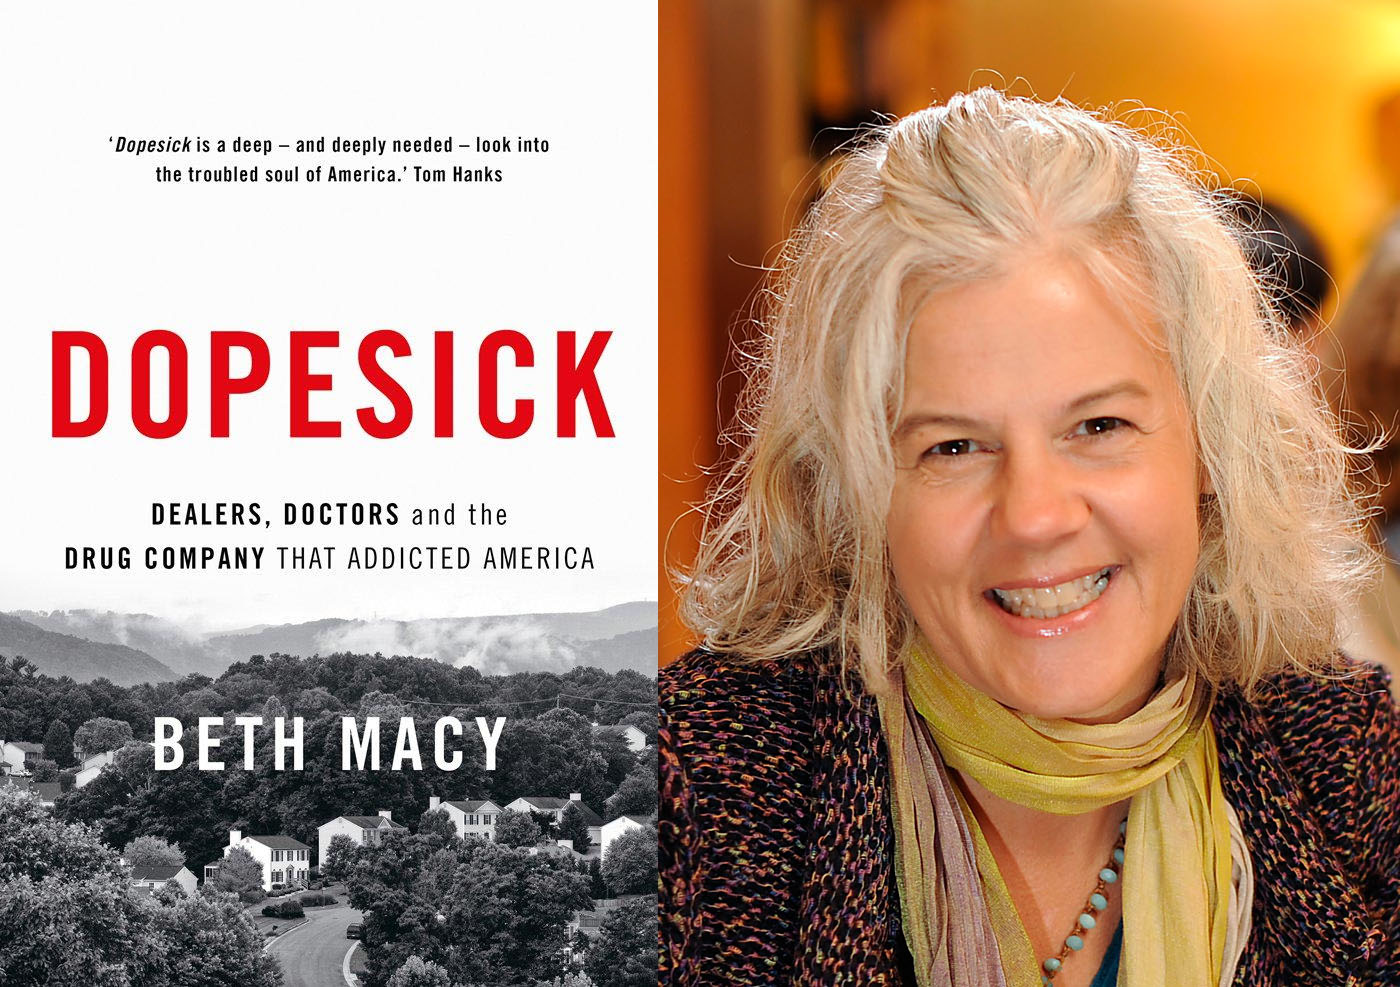 Beth Macy headshot and cover of Dope Sick